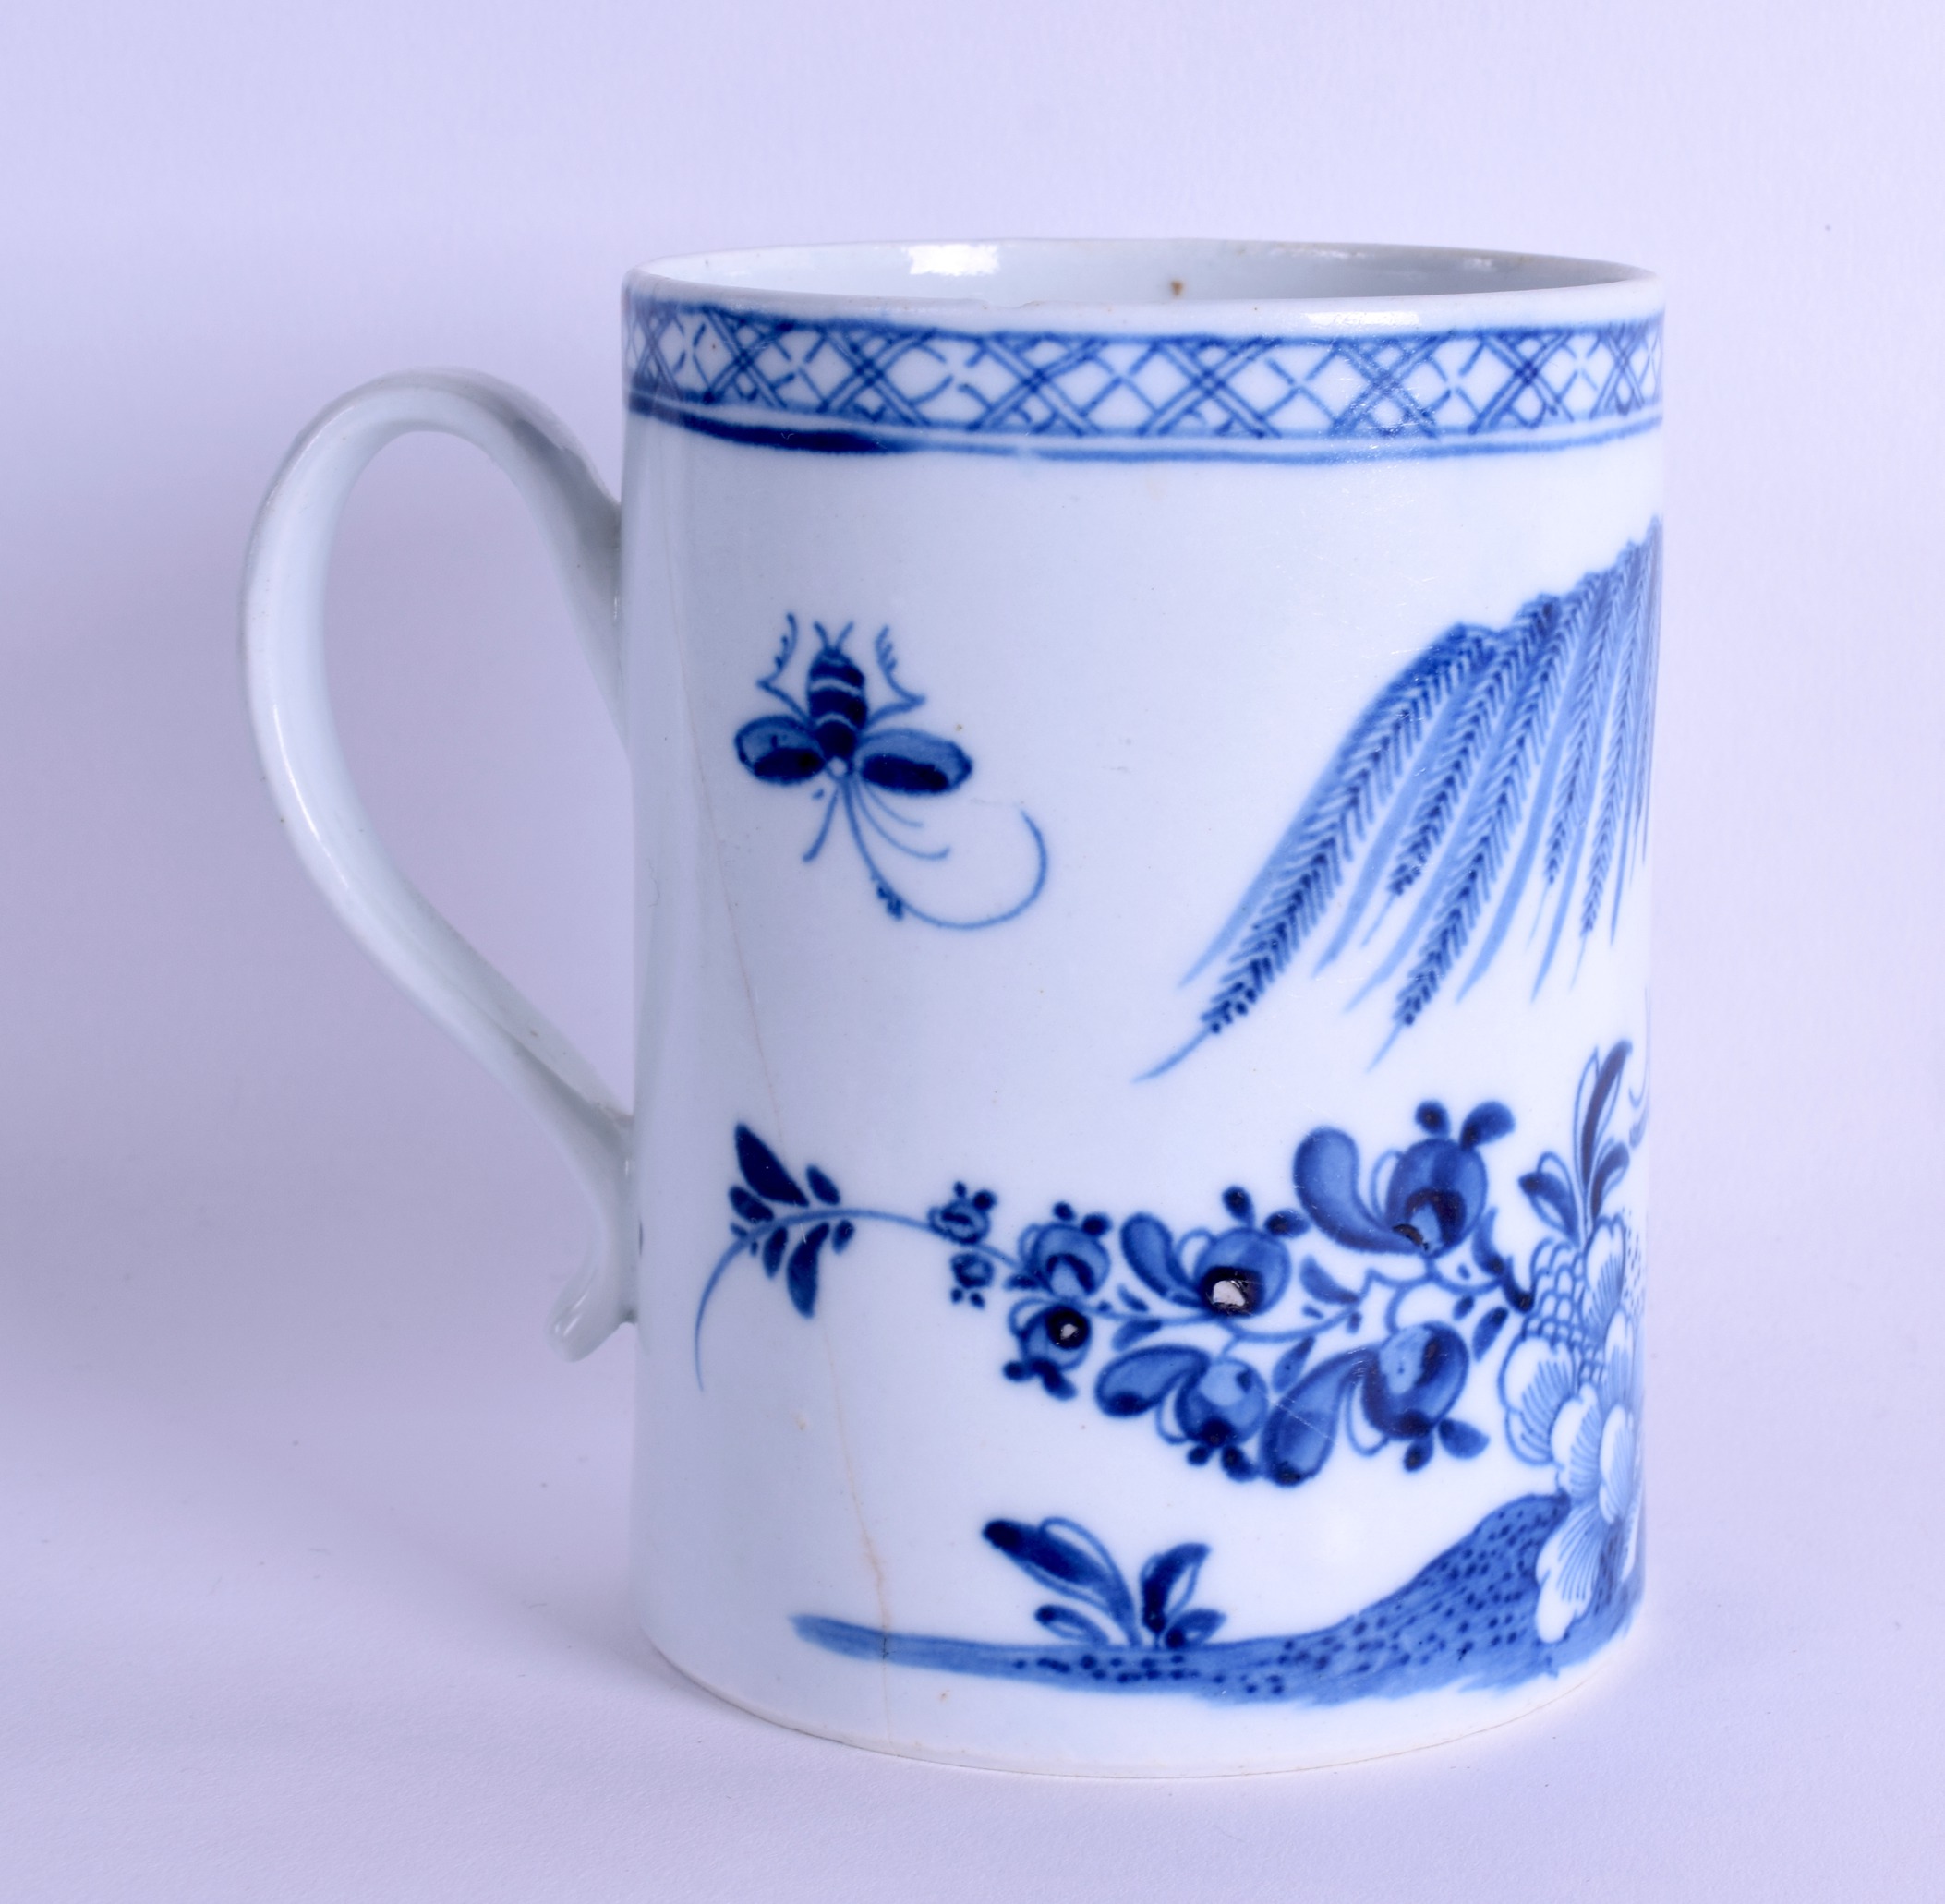 18th c. mug painted in under glaze blue with a fisherman beside a fence and willow probably Chaffers - Image 2 of 3